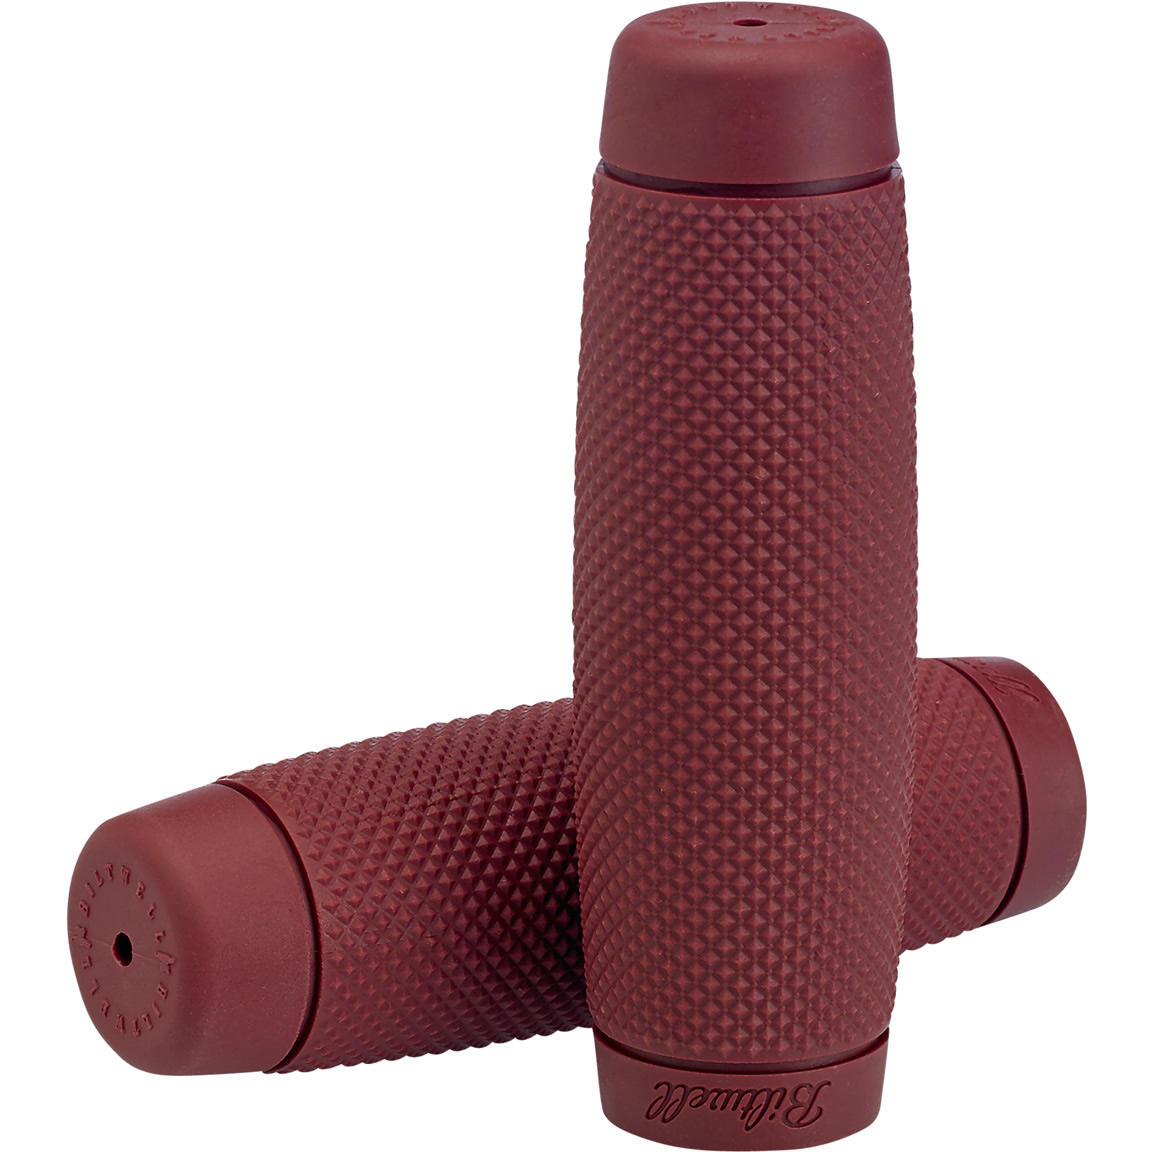 Grips - Recoil - 1" - Oxblood